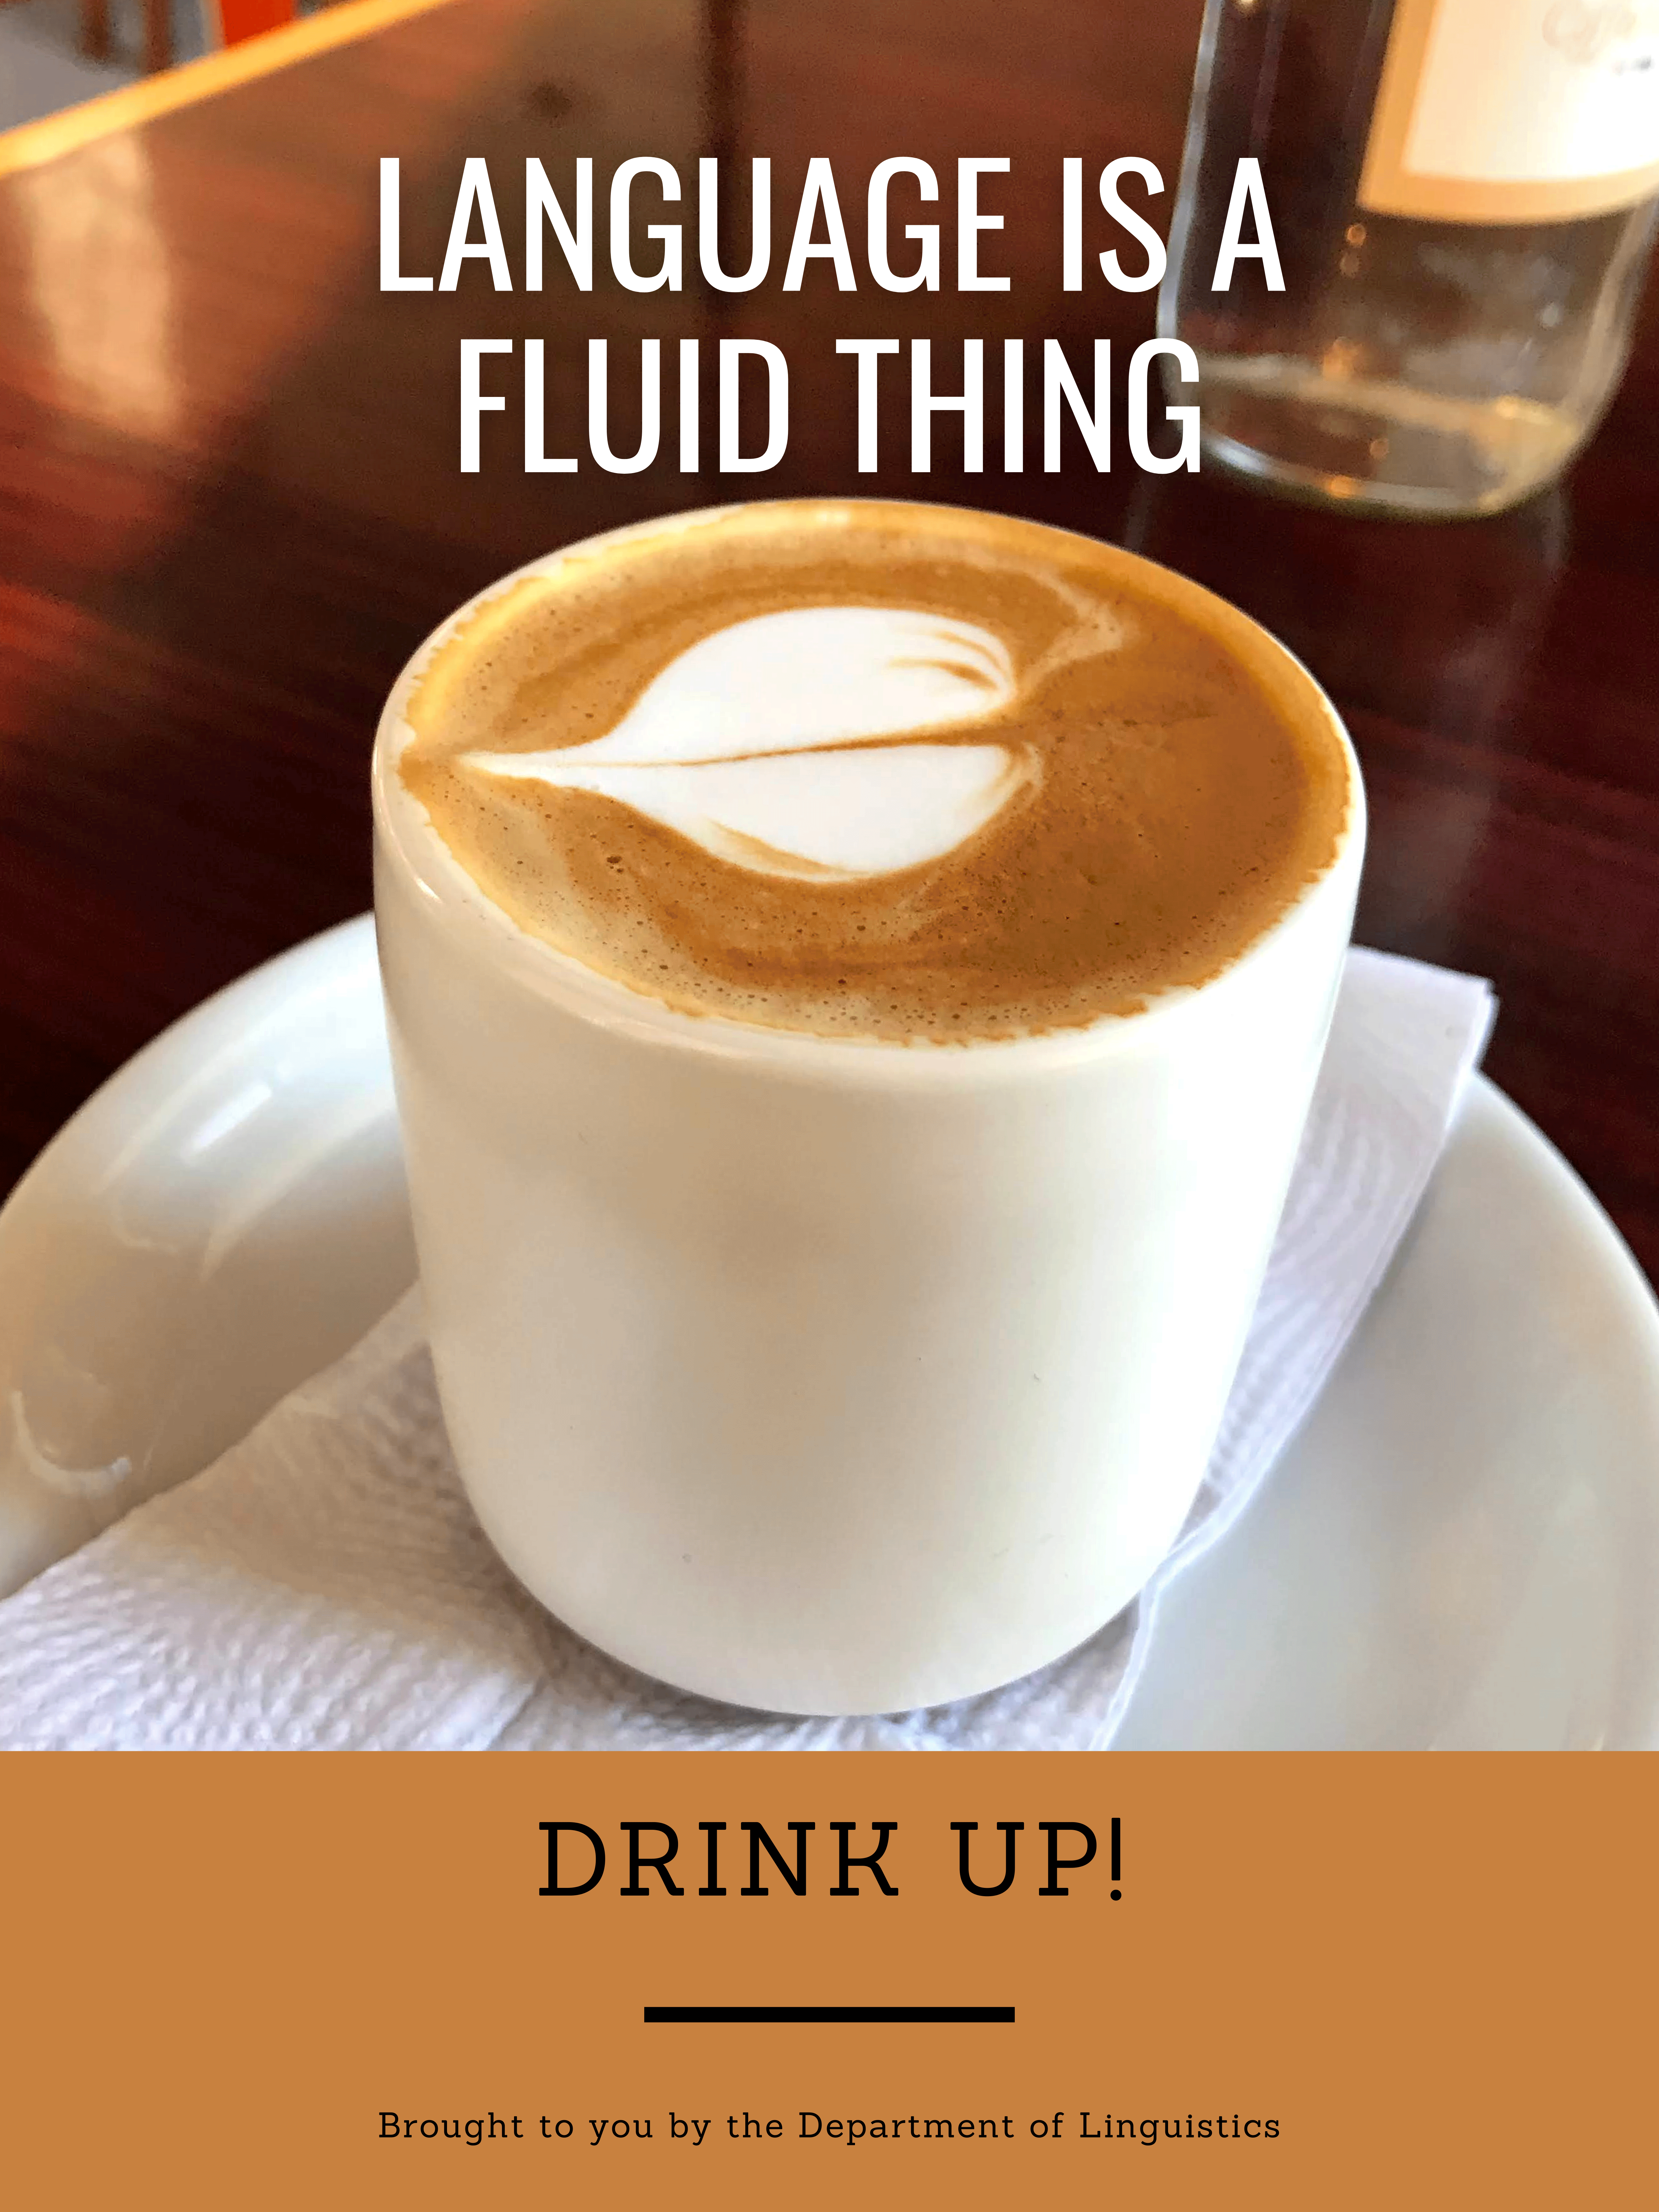 Linguistics Poster. Language is a fluid thing. Drink up! Brought to you by the Department of Linguistics. Shows a fancy cup of coffee.